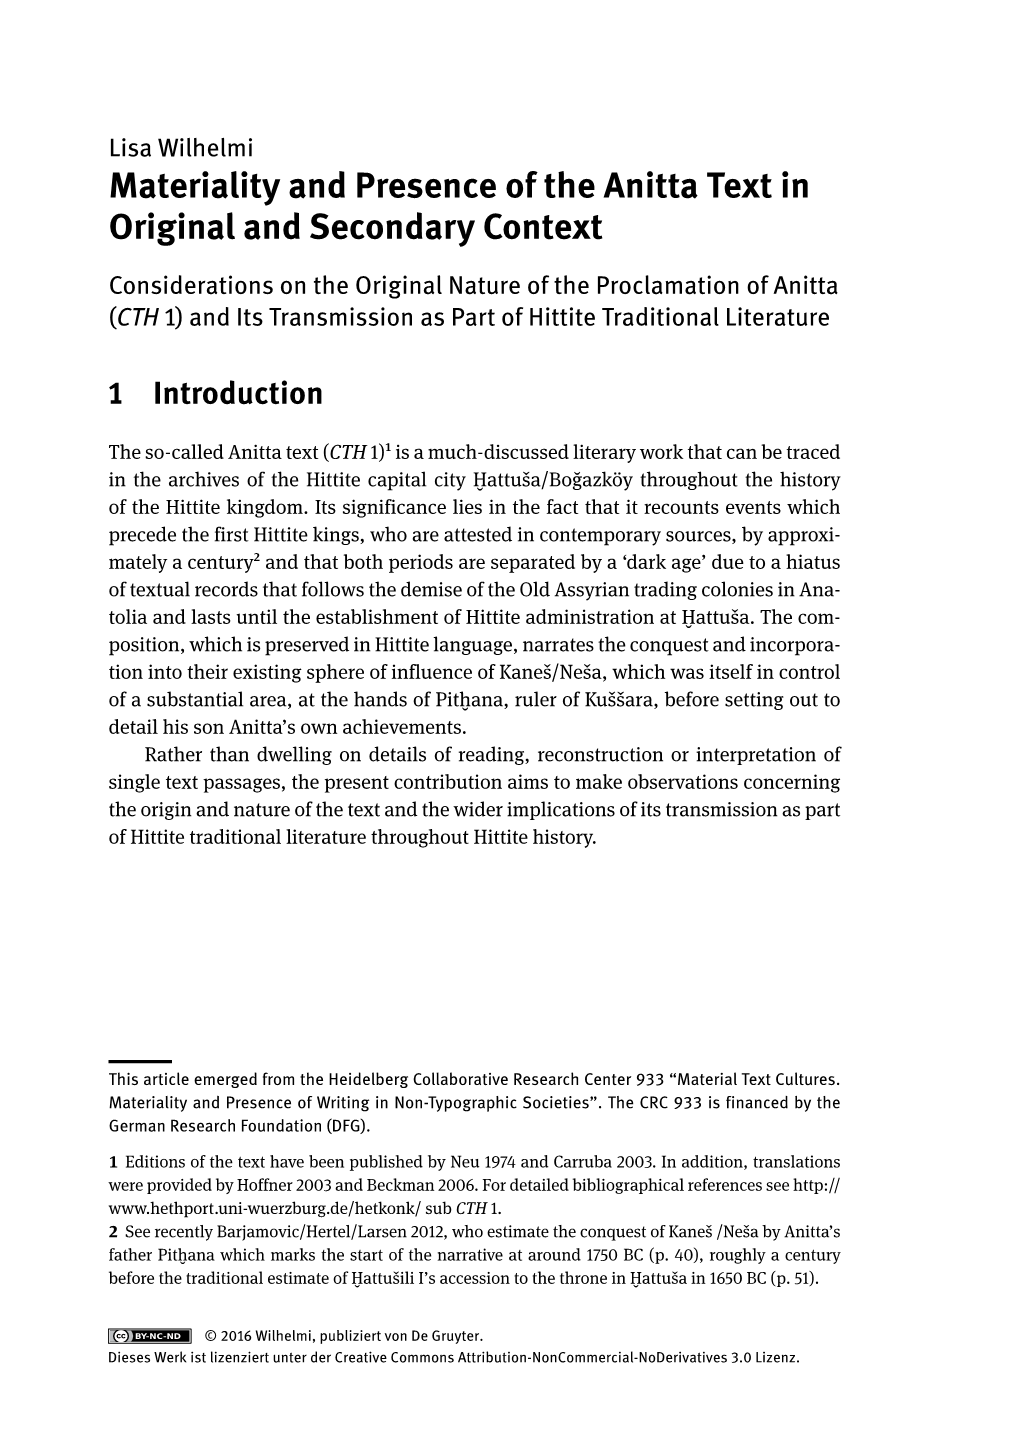 Materiality and Presence of the Anitta Text in Original and Secondary